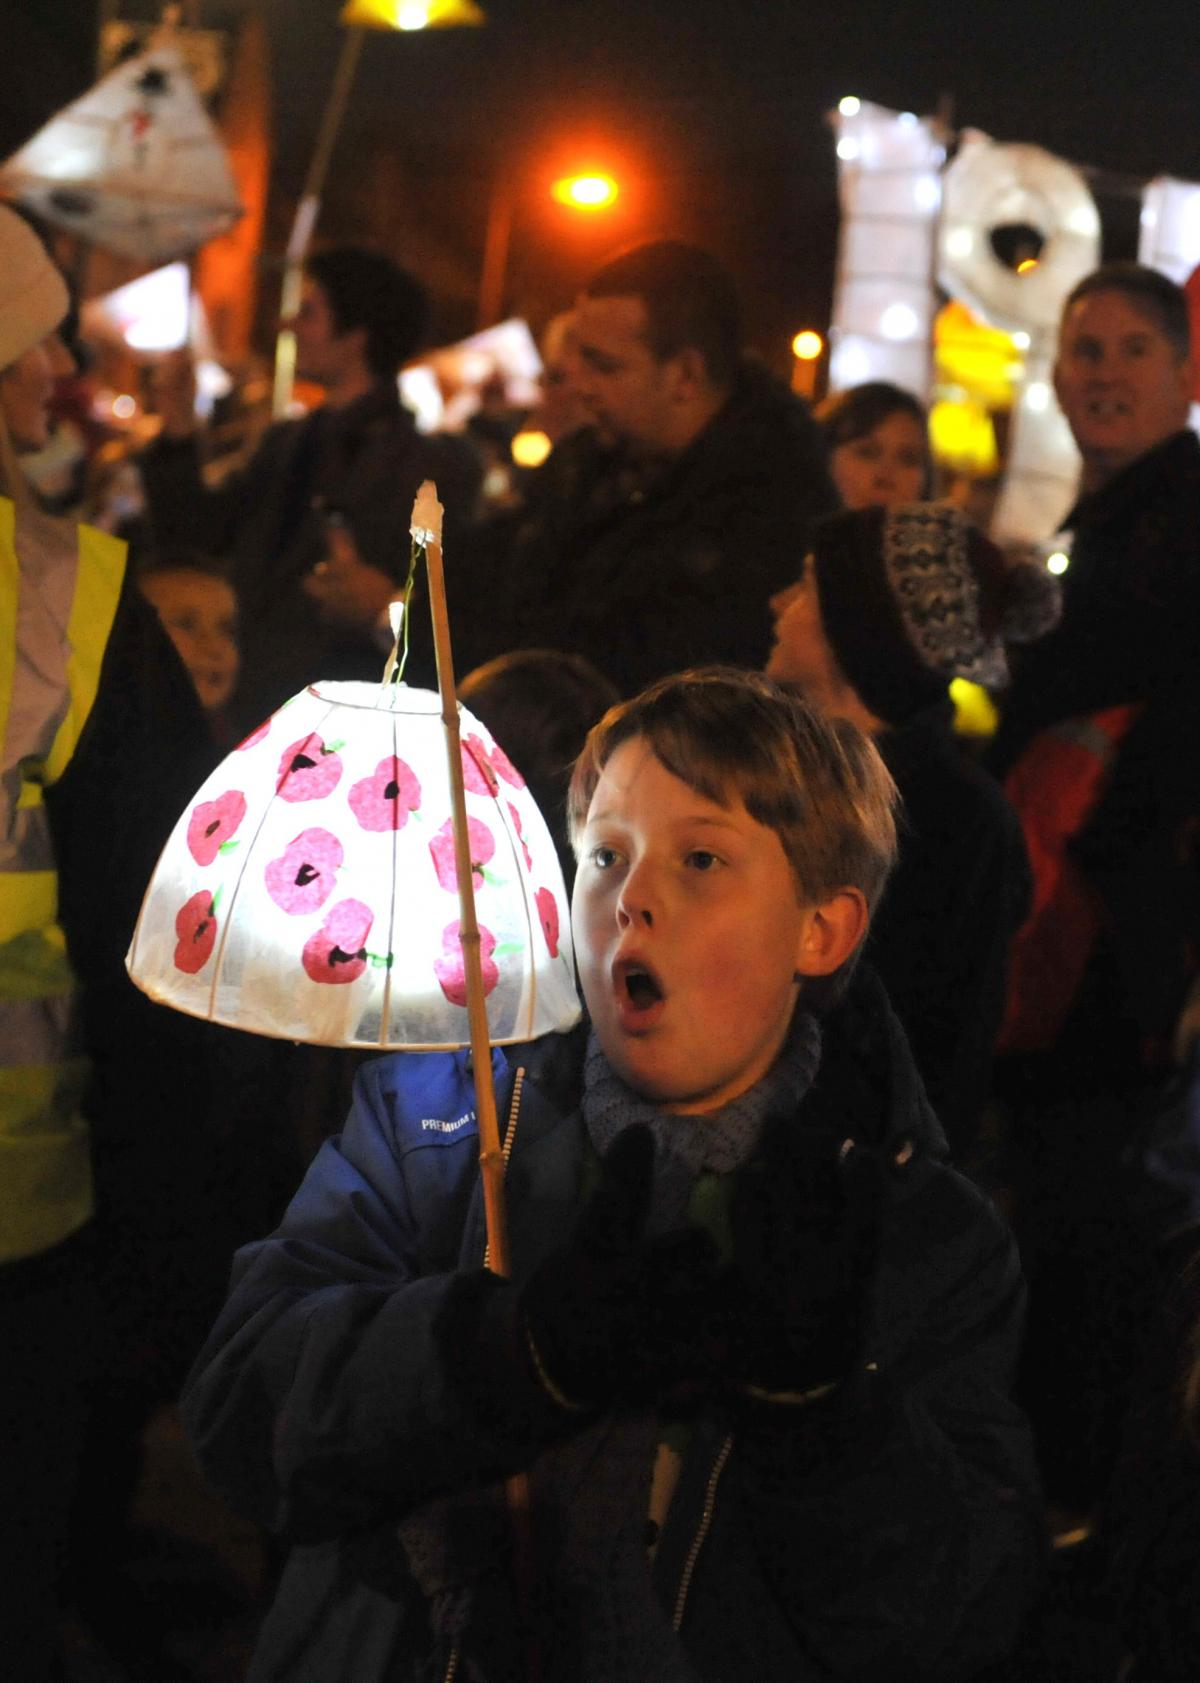 Calne Christmas lights switch-on and lantern parade photographed by Siobhan Boyle